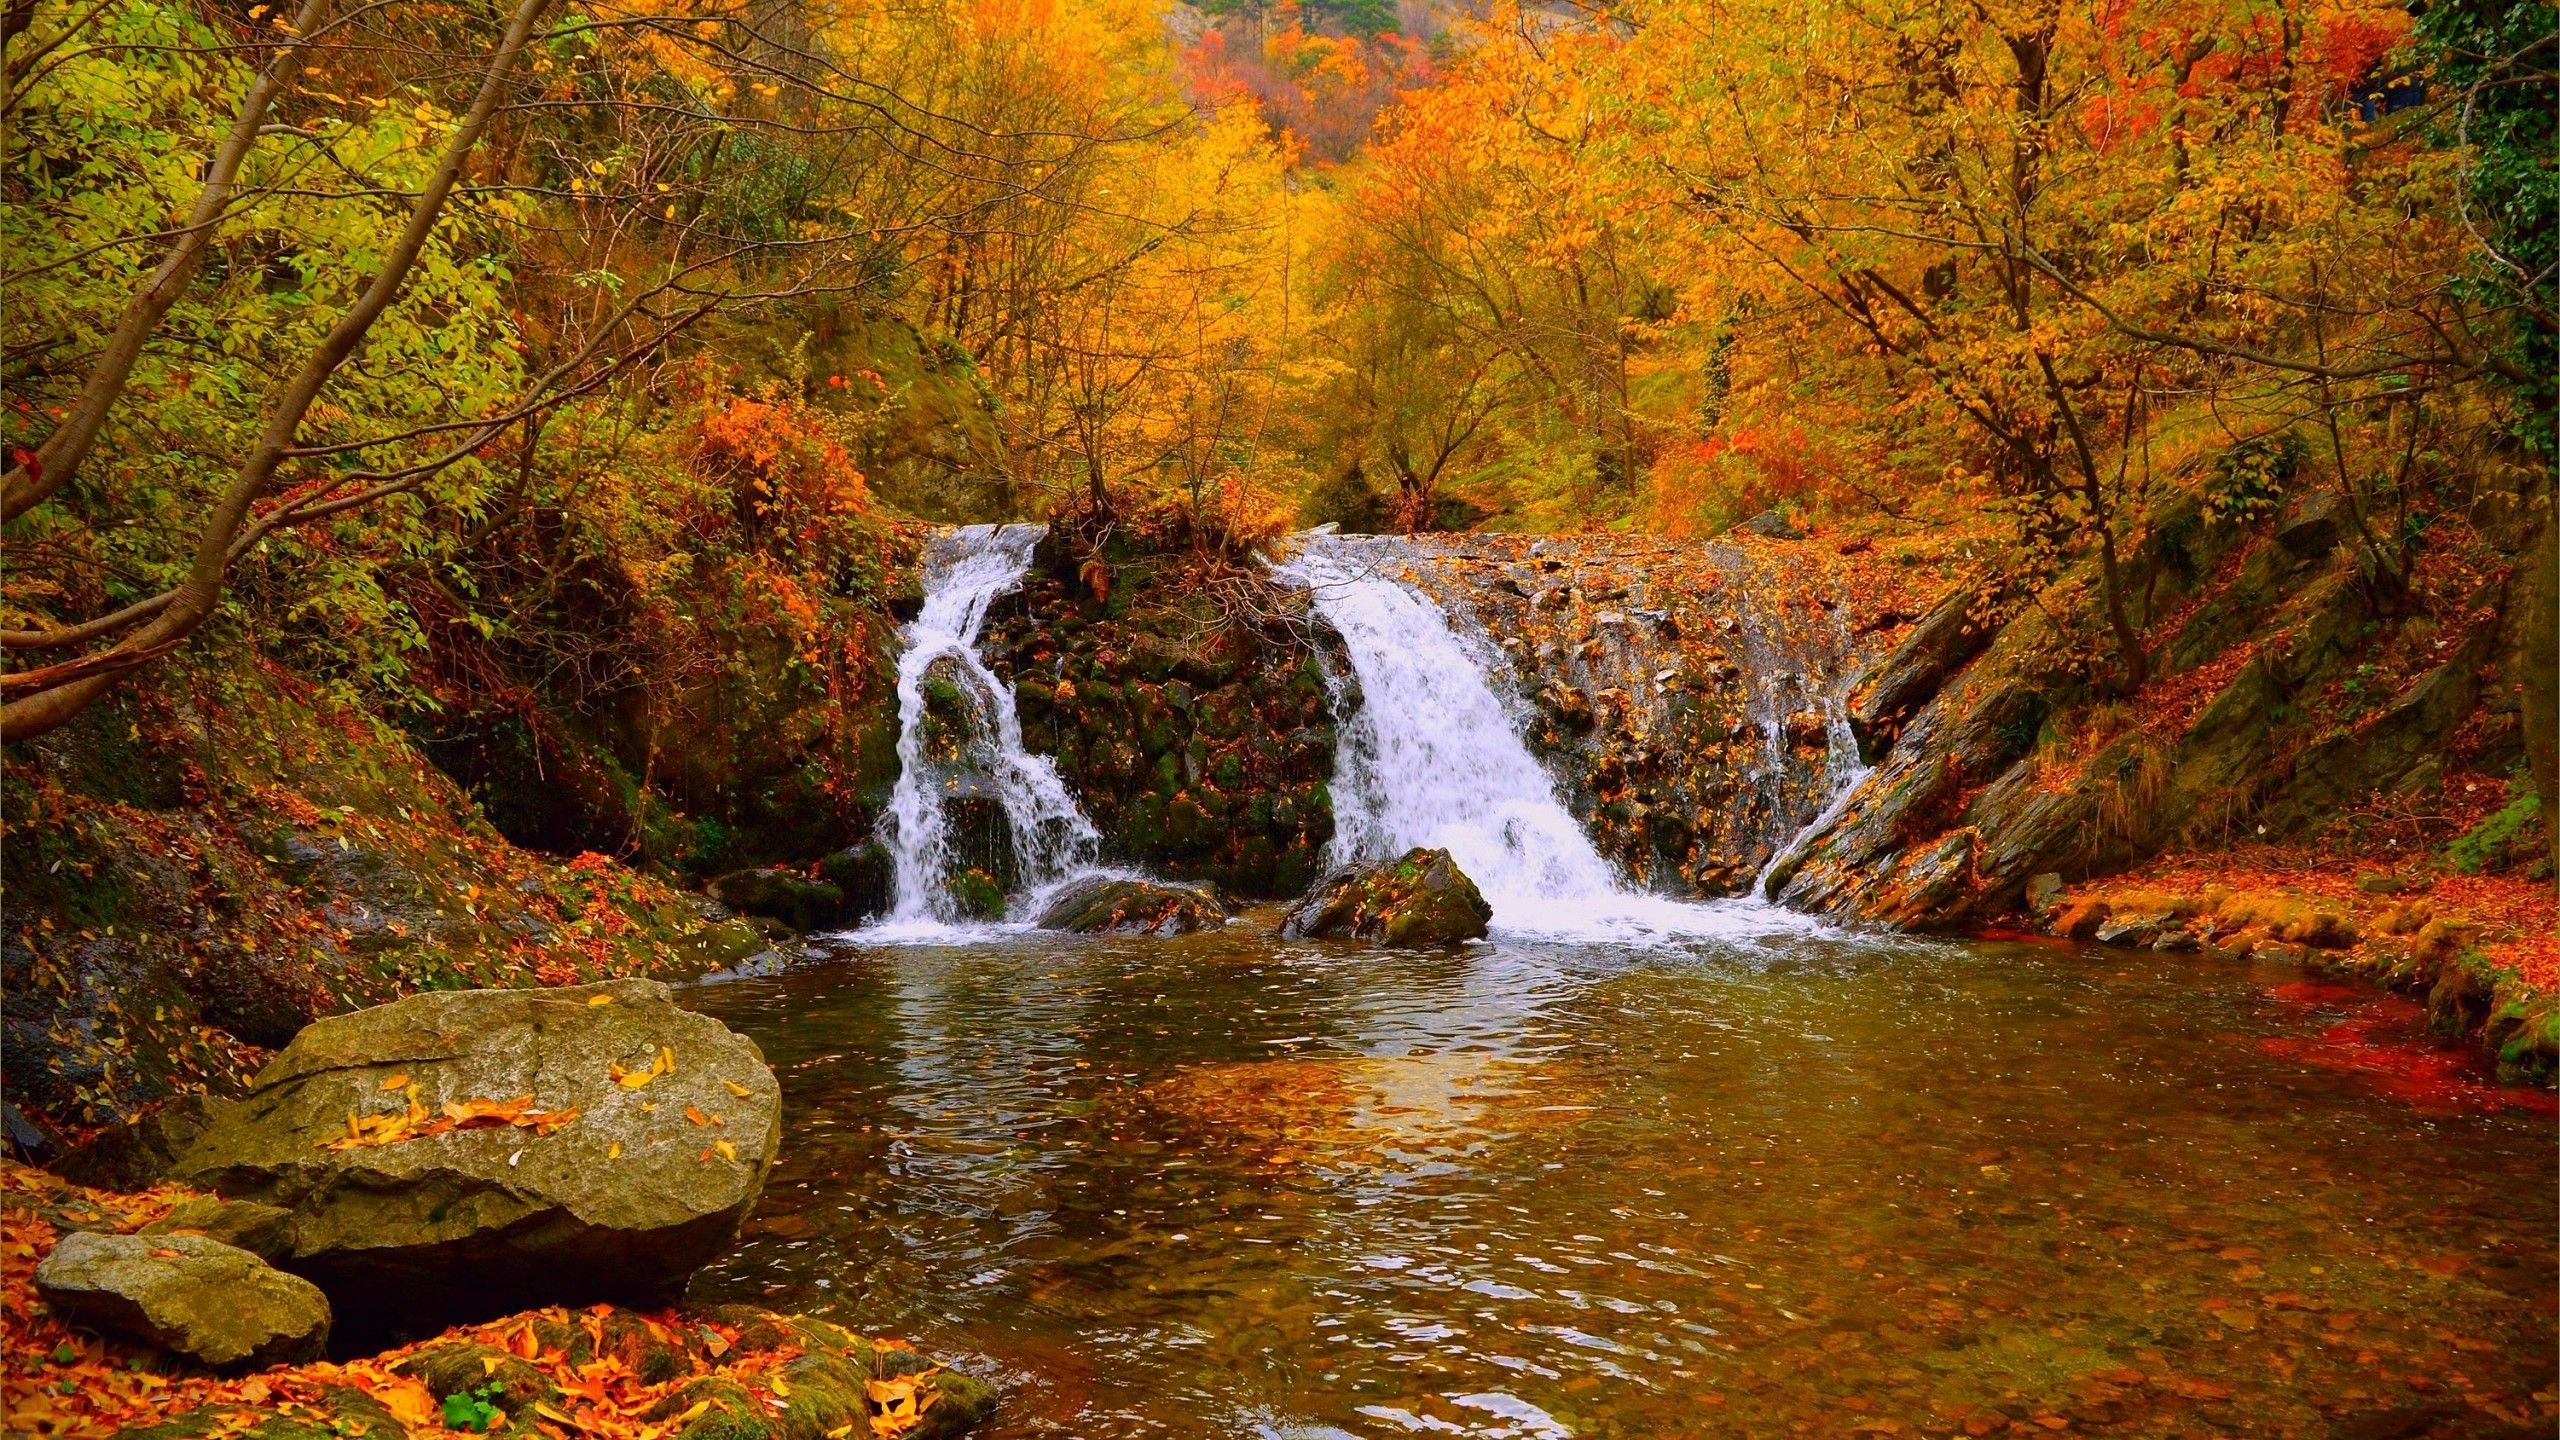 Download 2560x1440 Autumn, Waterfall, Vibrant Colors, Pretty, Photography, Stream, Forest Wallpaper for iMac 27 inch